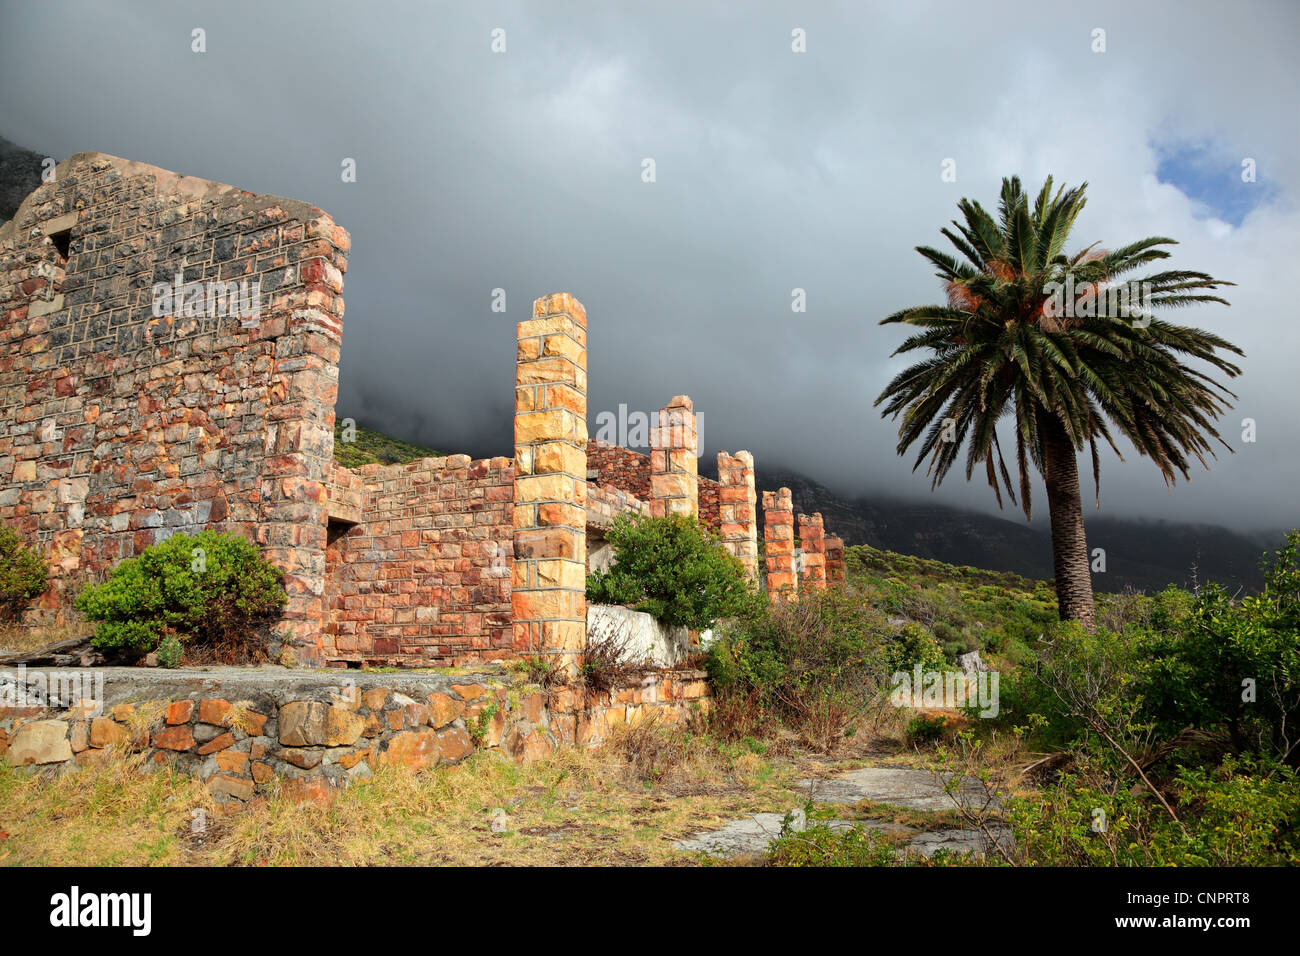 Ruins of an old building with palm tree in mist Stock Photo